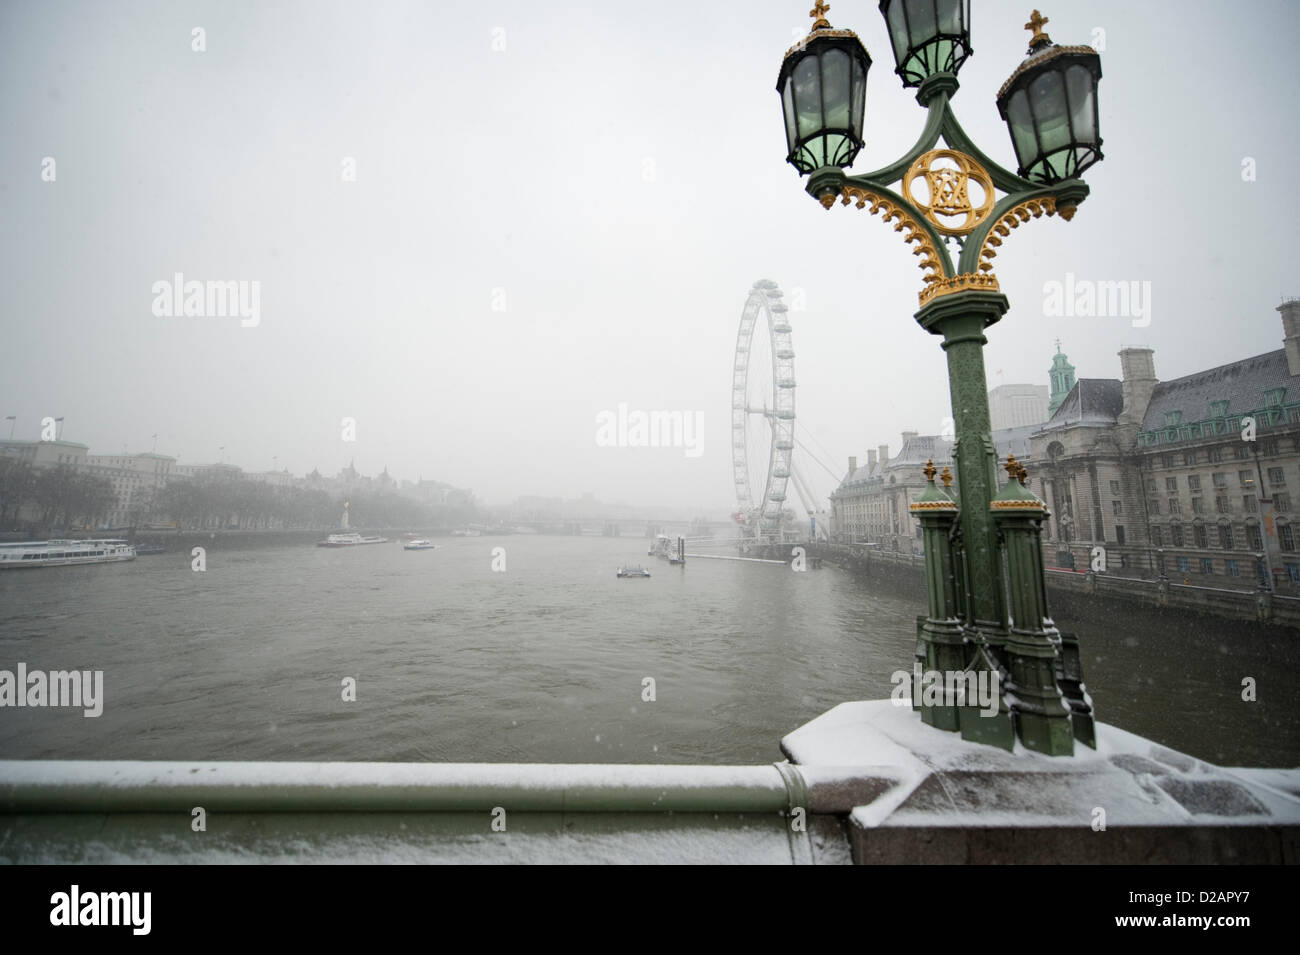 Westminster Bridge, London, UK. 18 January 2013. Snow falling in Central London creating bad visibility on Friday morning. An amber severe weather warning was announced for London and the SE of England. Credit: Malcolm Park/Alamy Live News. Stock Photo